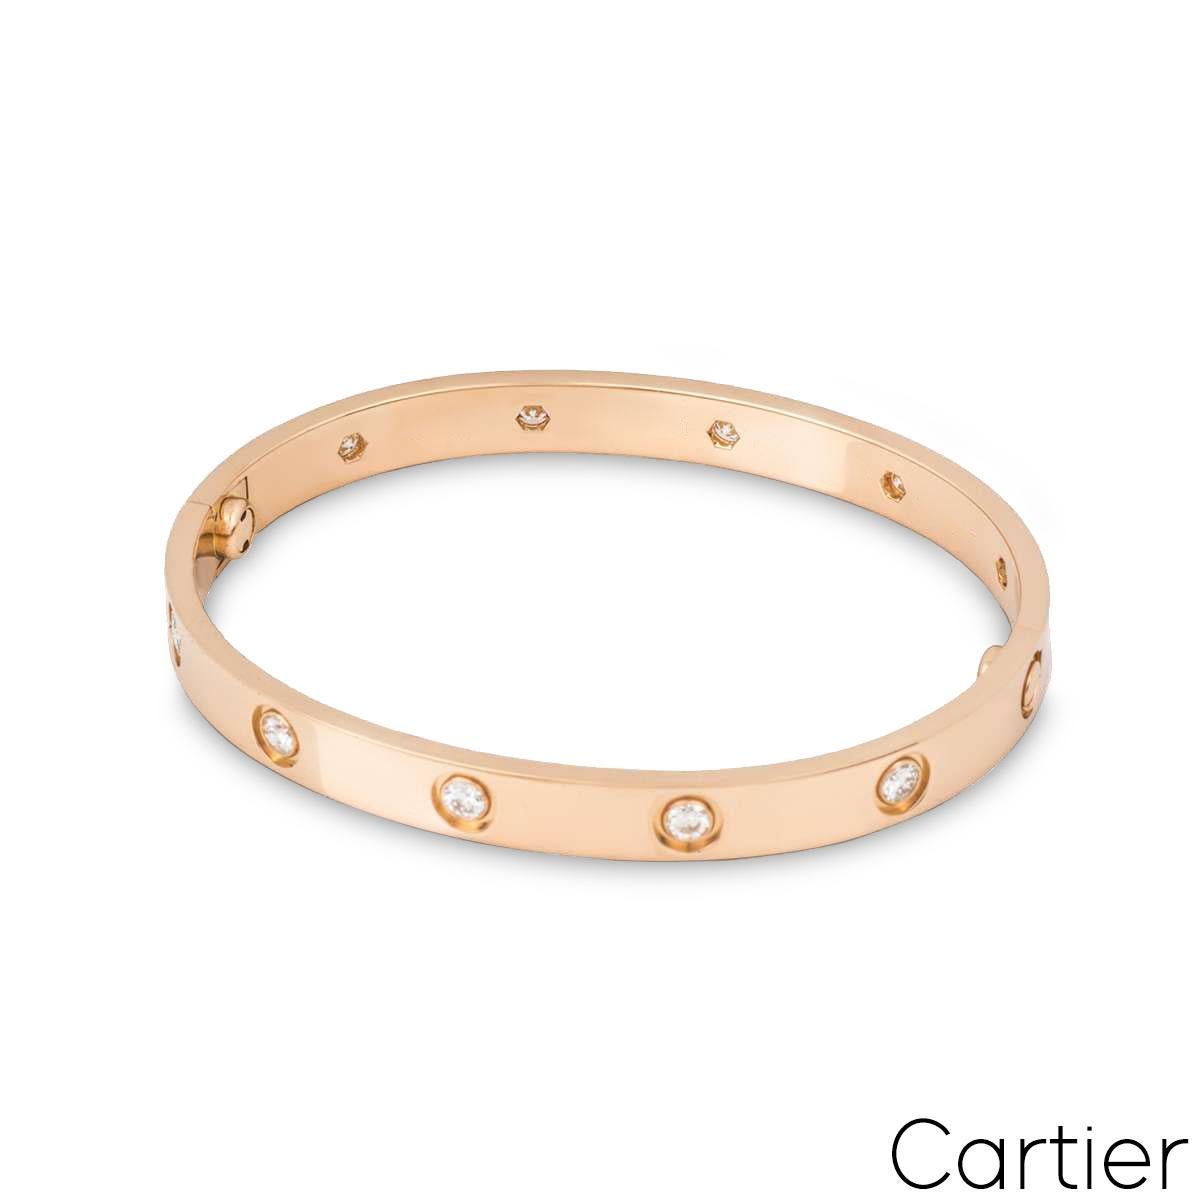 Cartier Rose Gold Full Diamond Love Bracelet Size 20 B6040620 In Excellent Condition For Sale In London, GB